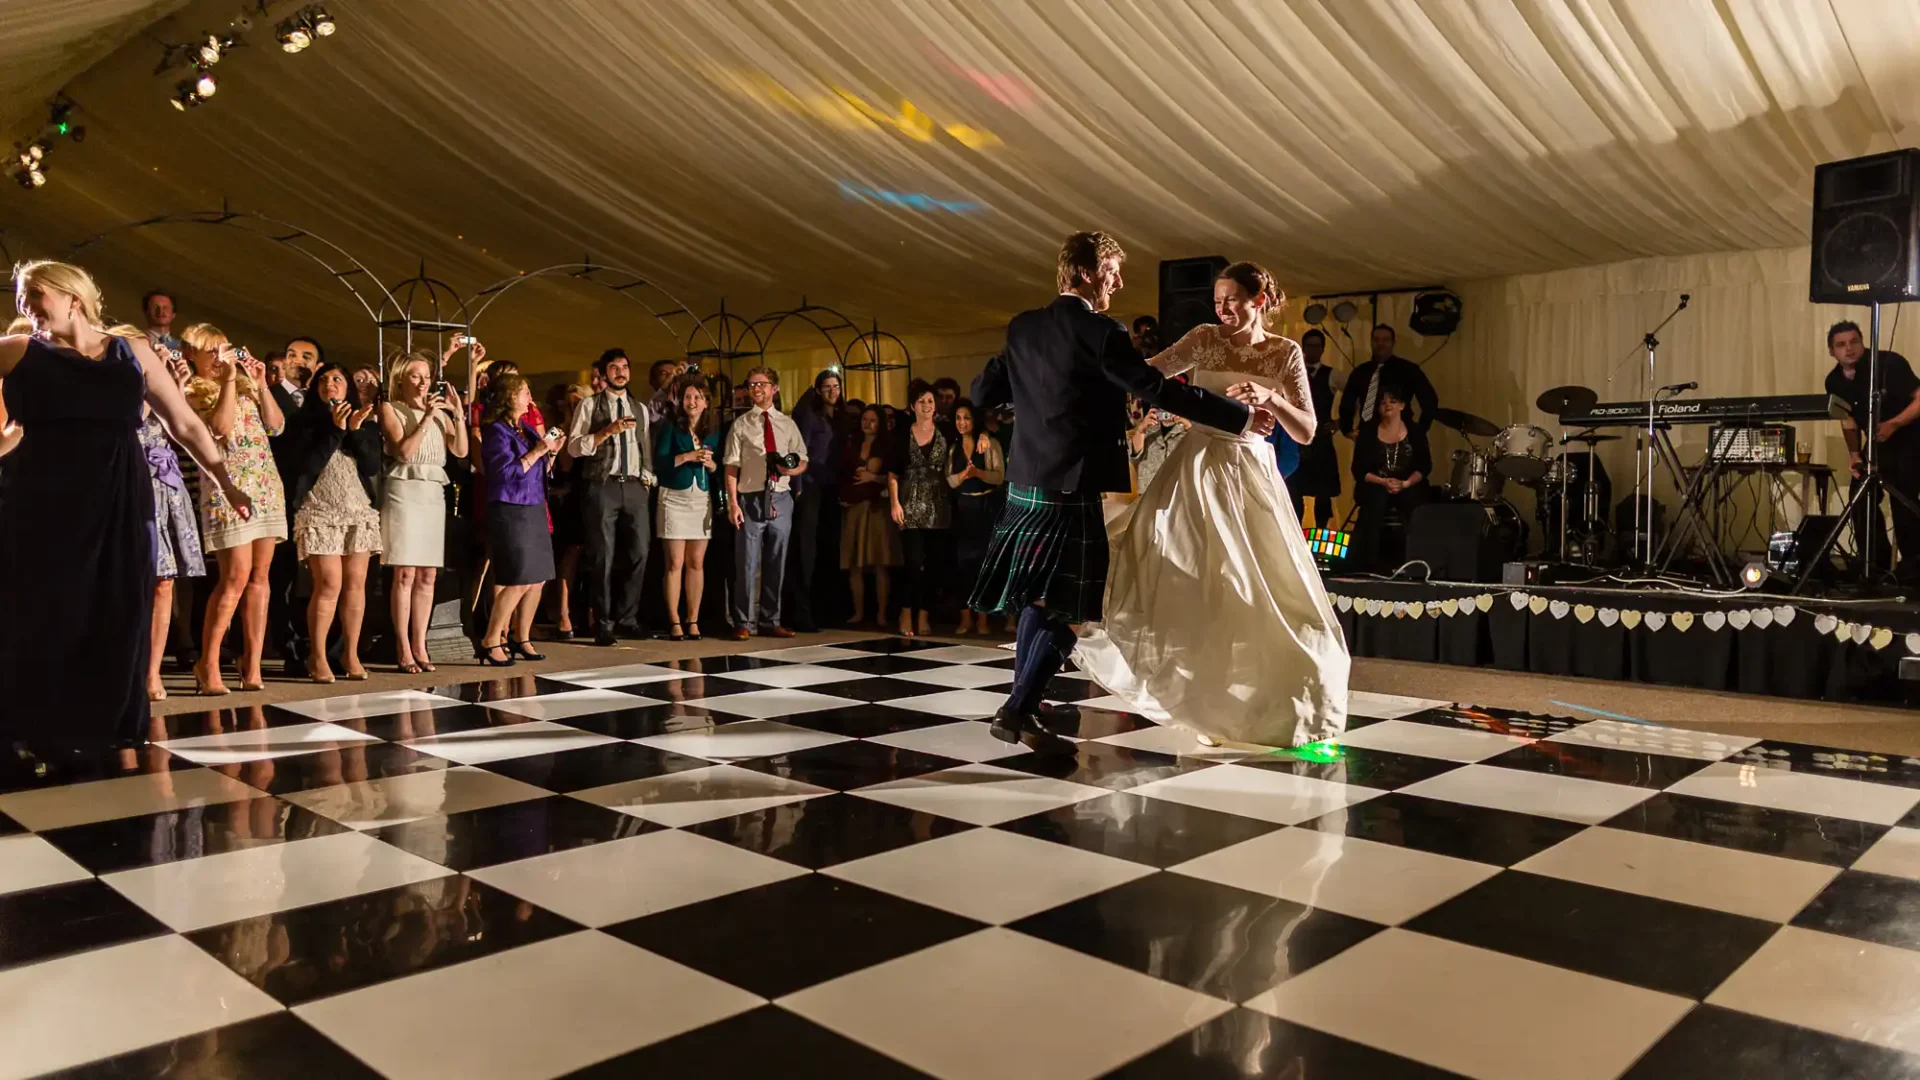 A bride and groom in a kilt dance at their wedding reception, surrounded by cheering guests on a checkered dance floor with a band in the background.